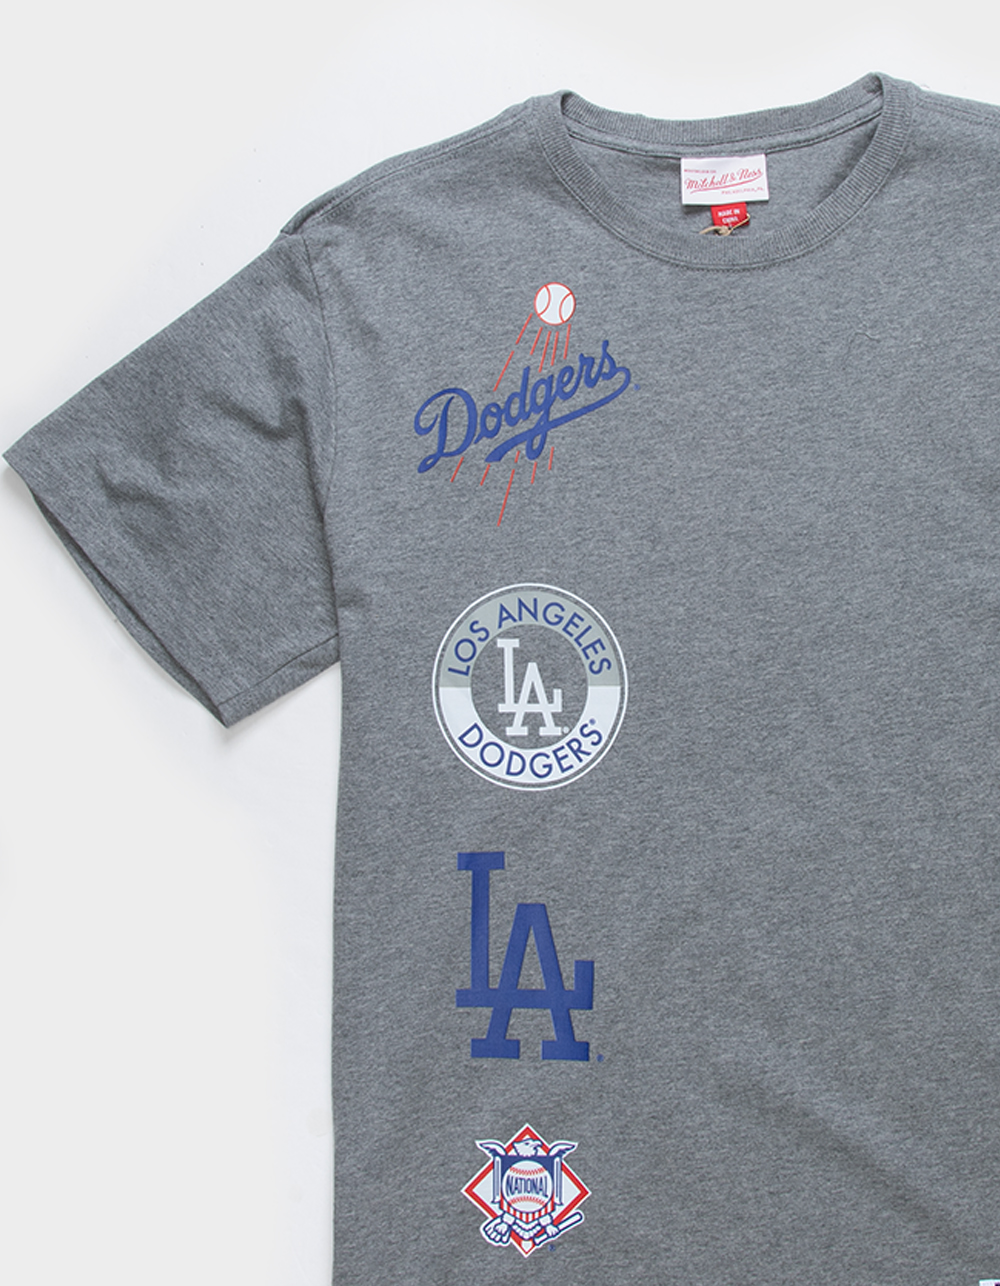 Los Angeles Dodgers Tee - Shop Mitchell & Ness Shirts and Apparel